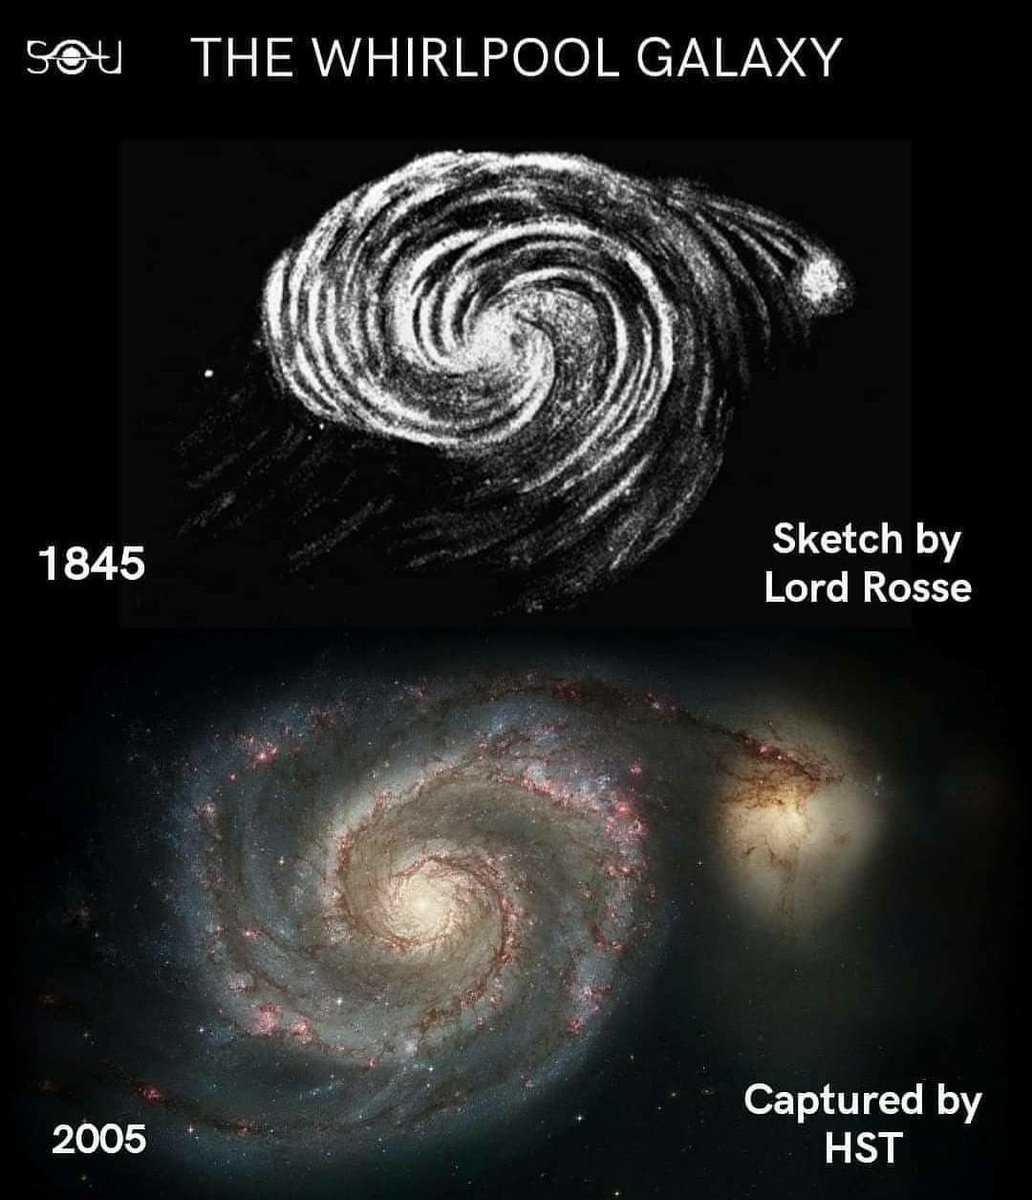 Sketch of the Whirlpool Galaxy (M51) by Lord Rosse, from 1845, and as seen by Hubble 160 years later